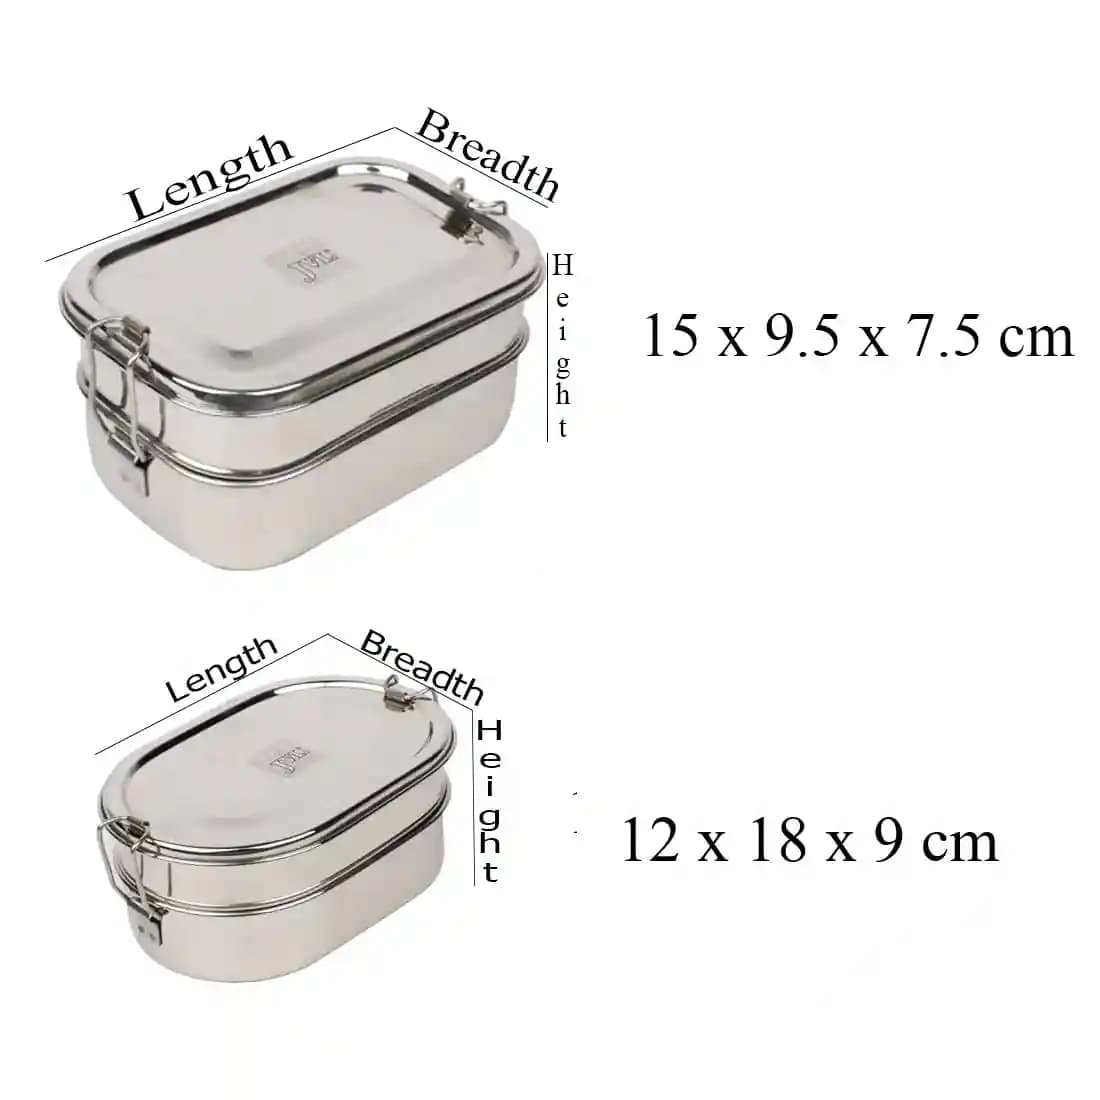 Jvl Stainless Steel Rectangular Shape Double Layer Lunch Box With Inner Plate & Small Oval Shape Lunch Box With Mini Container Not Leak Proof - Pack Of 2